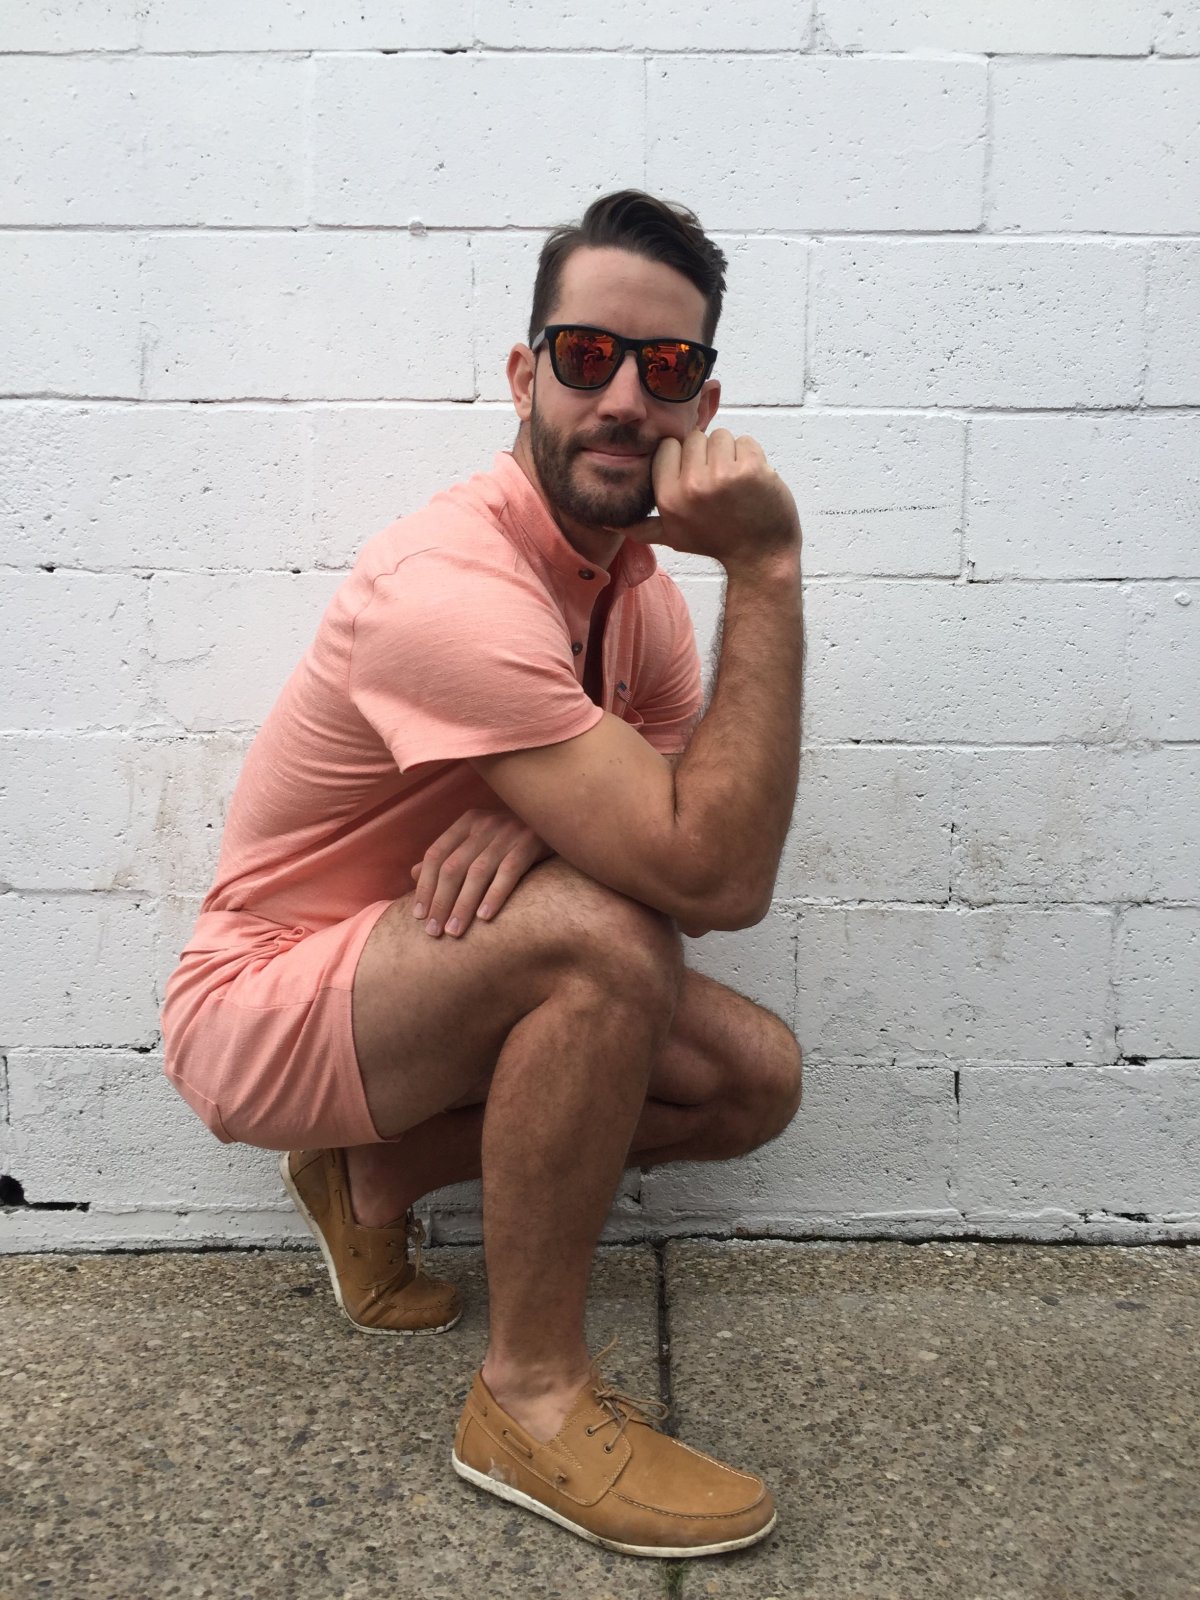 Pose like a bro in your RompHim